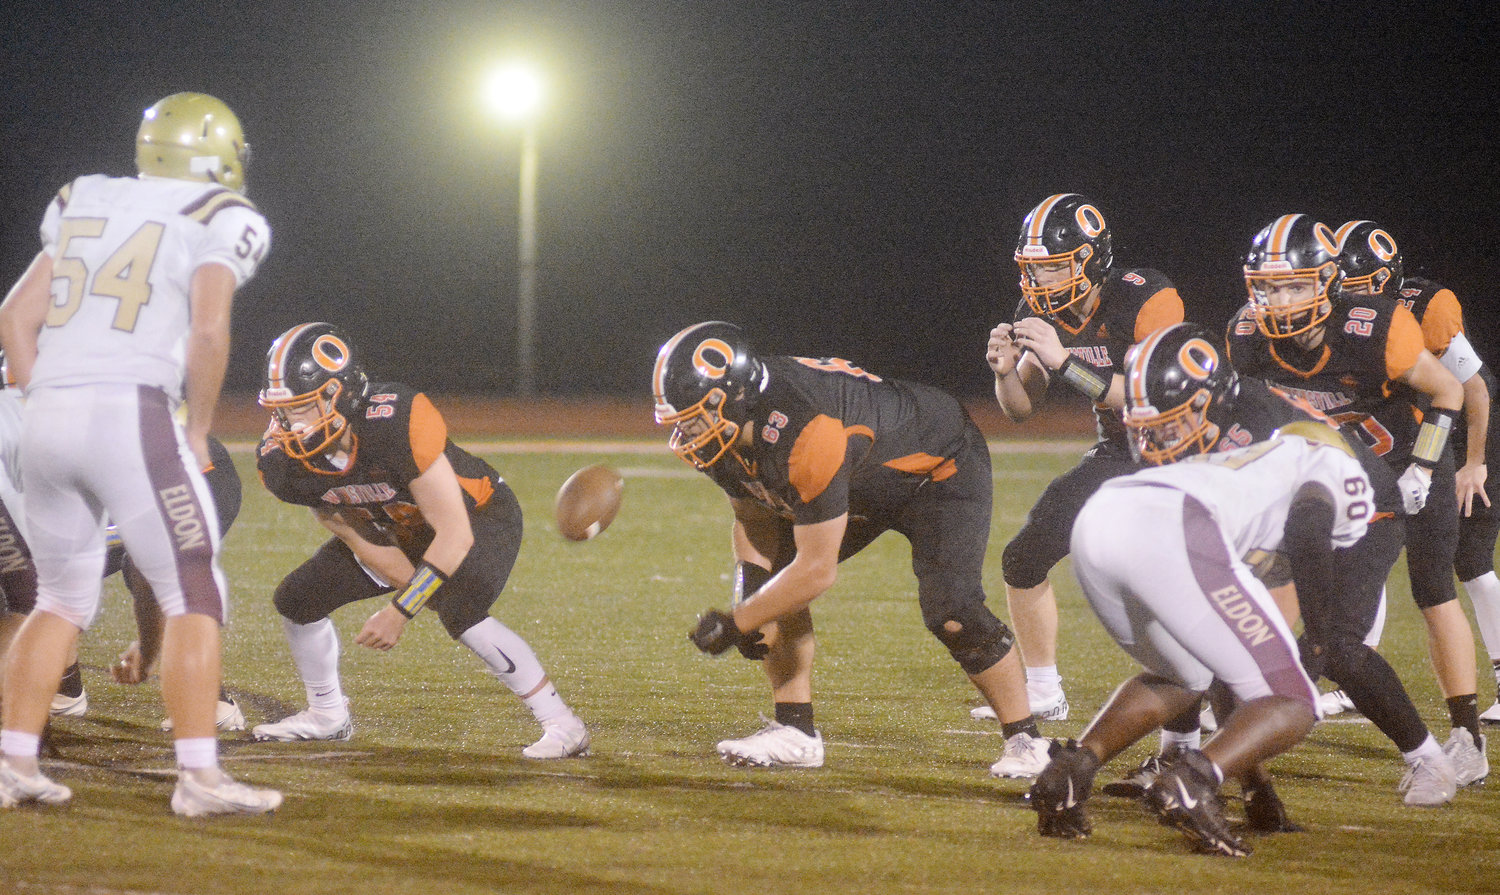 Blake Elliott (third from left) awaits the football after it was snapped by center Landon Kramme (above, second from left). Dutchmen lineman Hayden Shoemaker and Chance Clevenger wait for some Mustangs to block while Austin Long (20) and Tanner Meyer (hidden, far right) wait to see if they get to carry the football against Eldon.